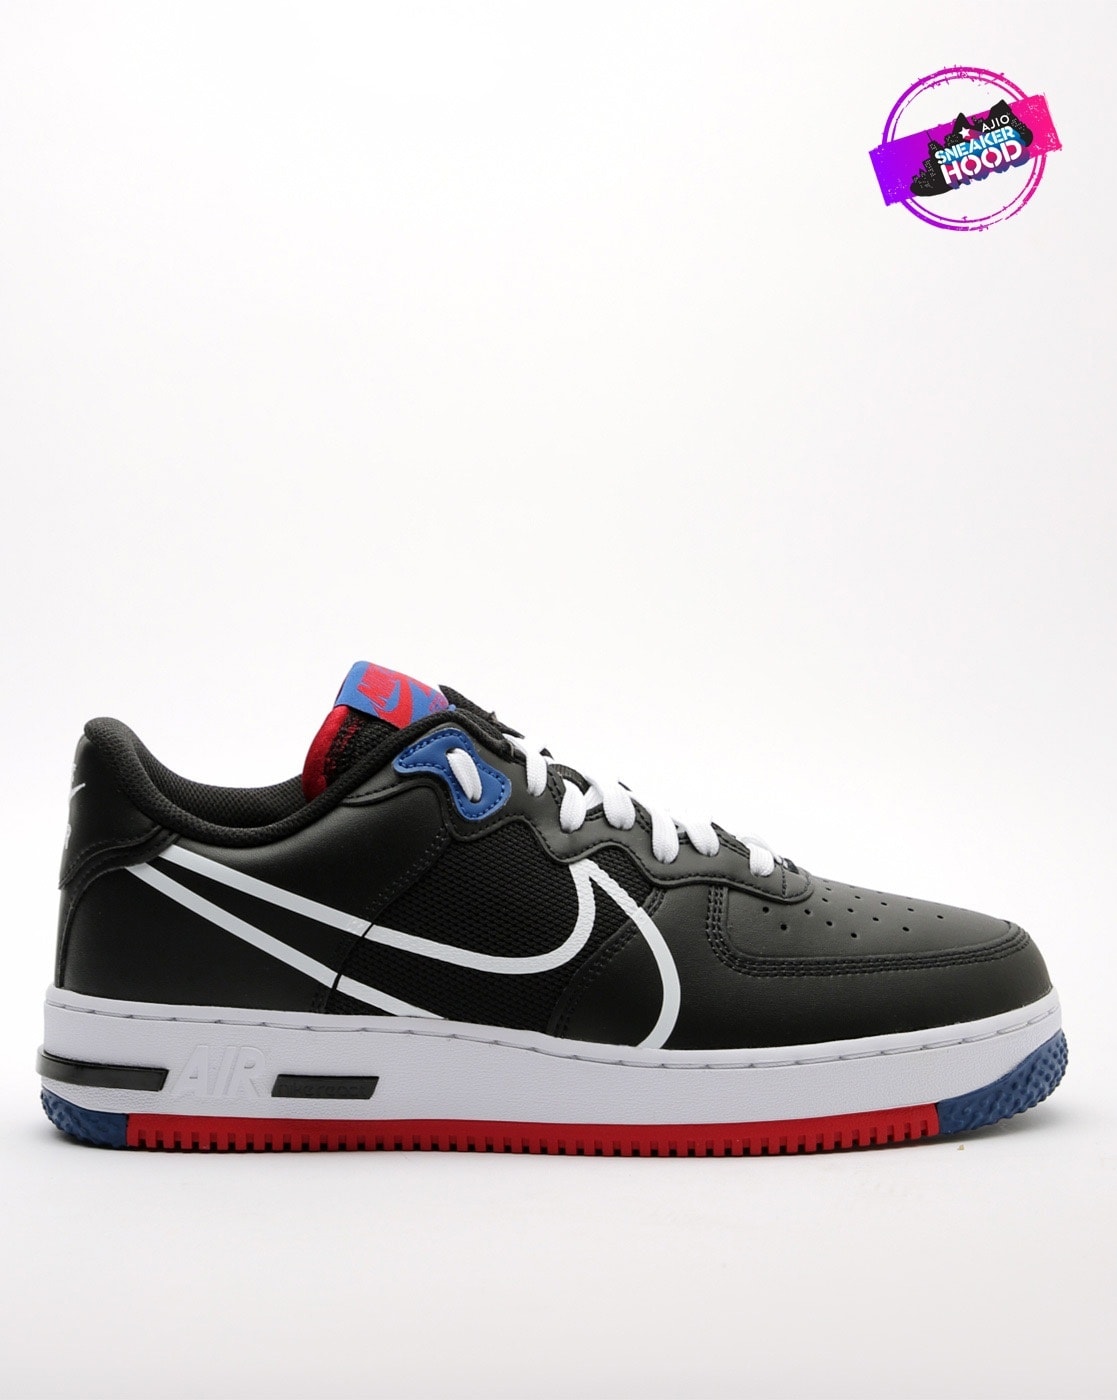 air force 1 basketball shoes